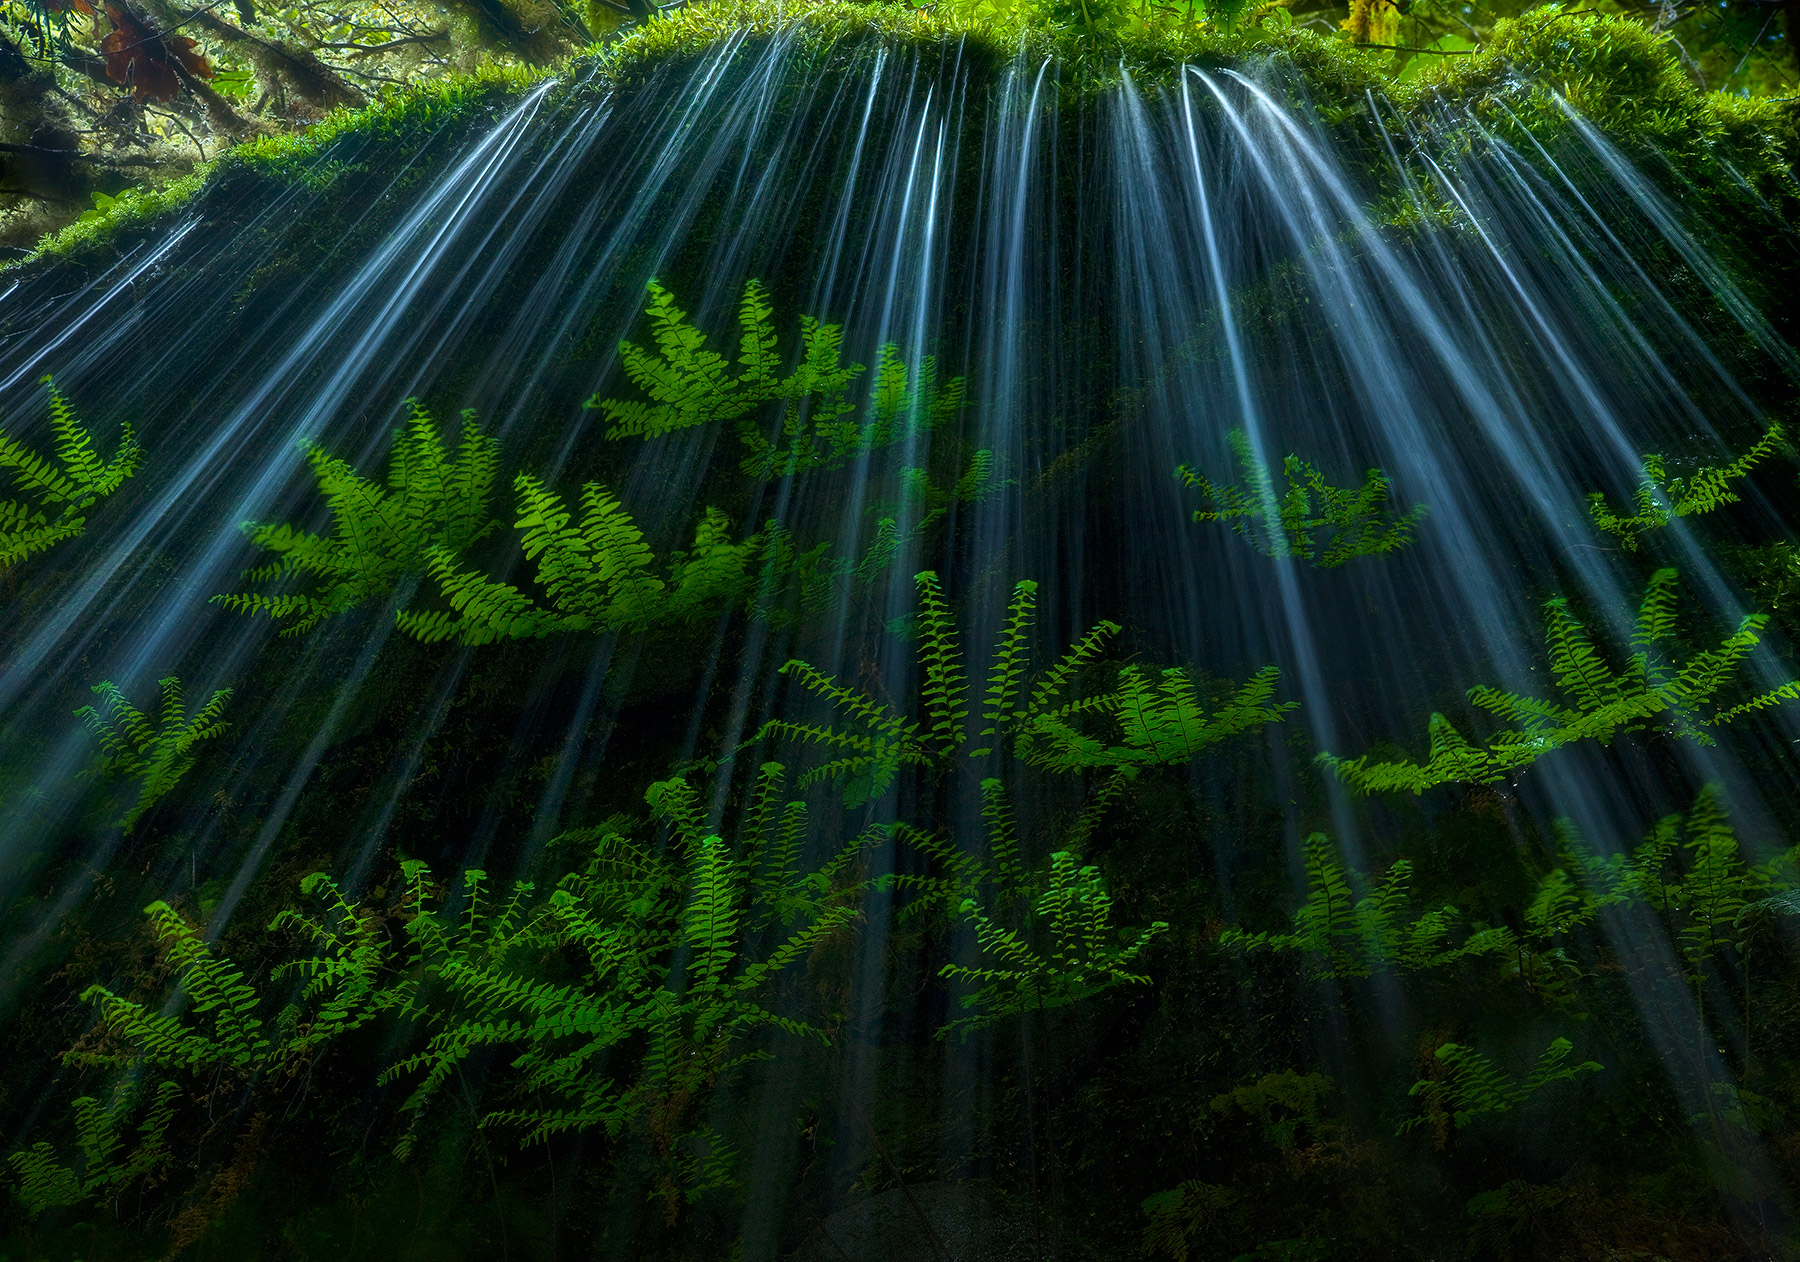 Maiden Ferns catching some light behind a dripping veil of falling water in Oregon's Columbia Gorge.